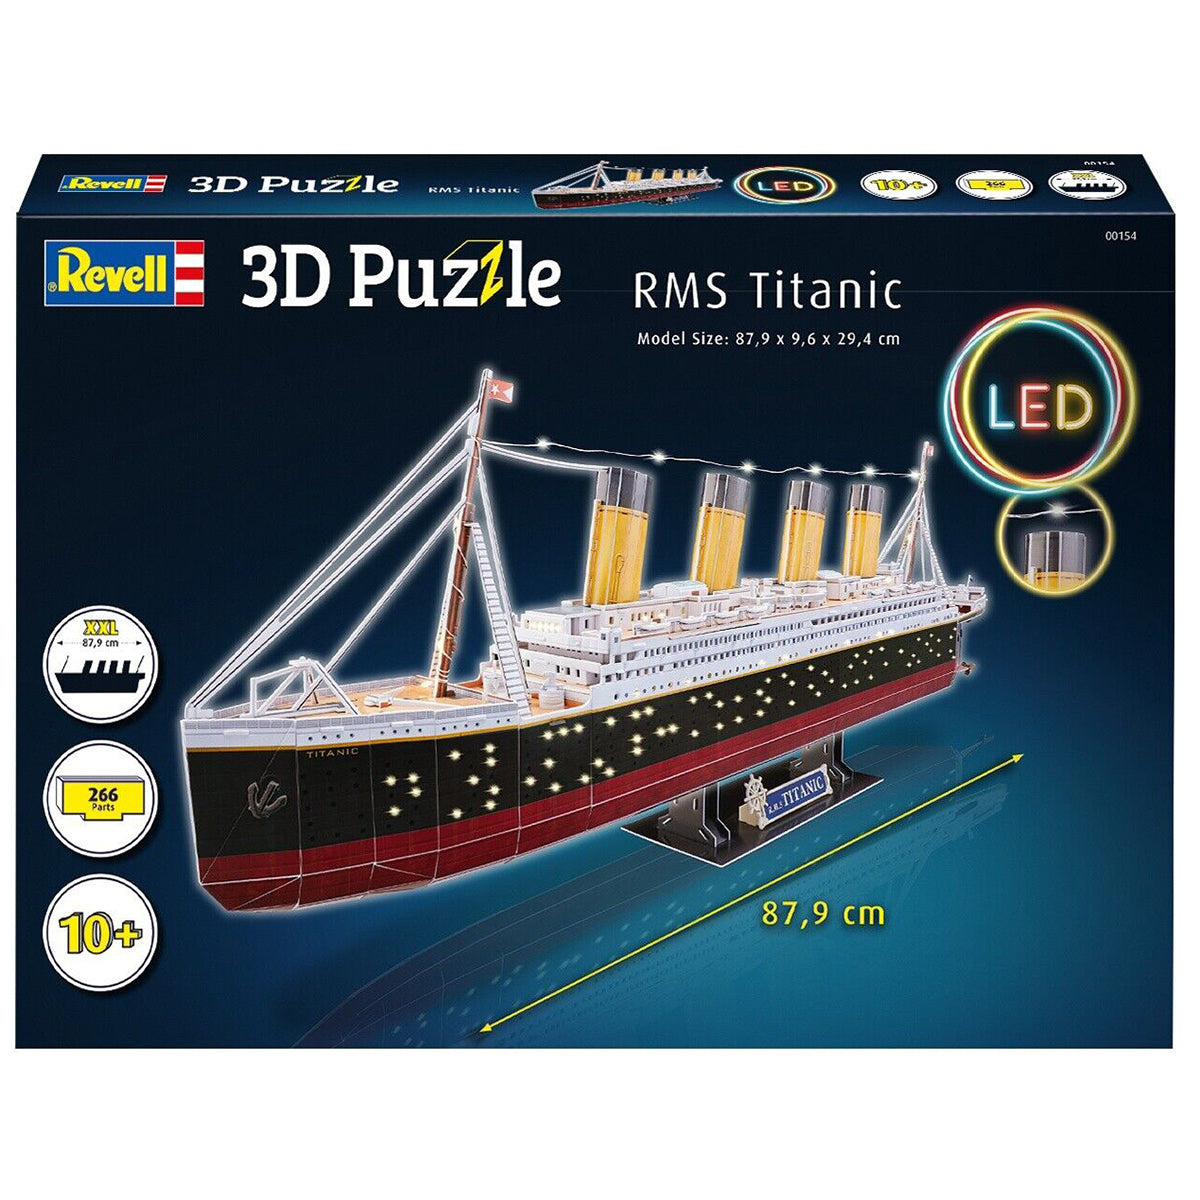 Revell - 3D Puzzle RMS Titanic - LED Edition